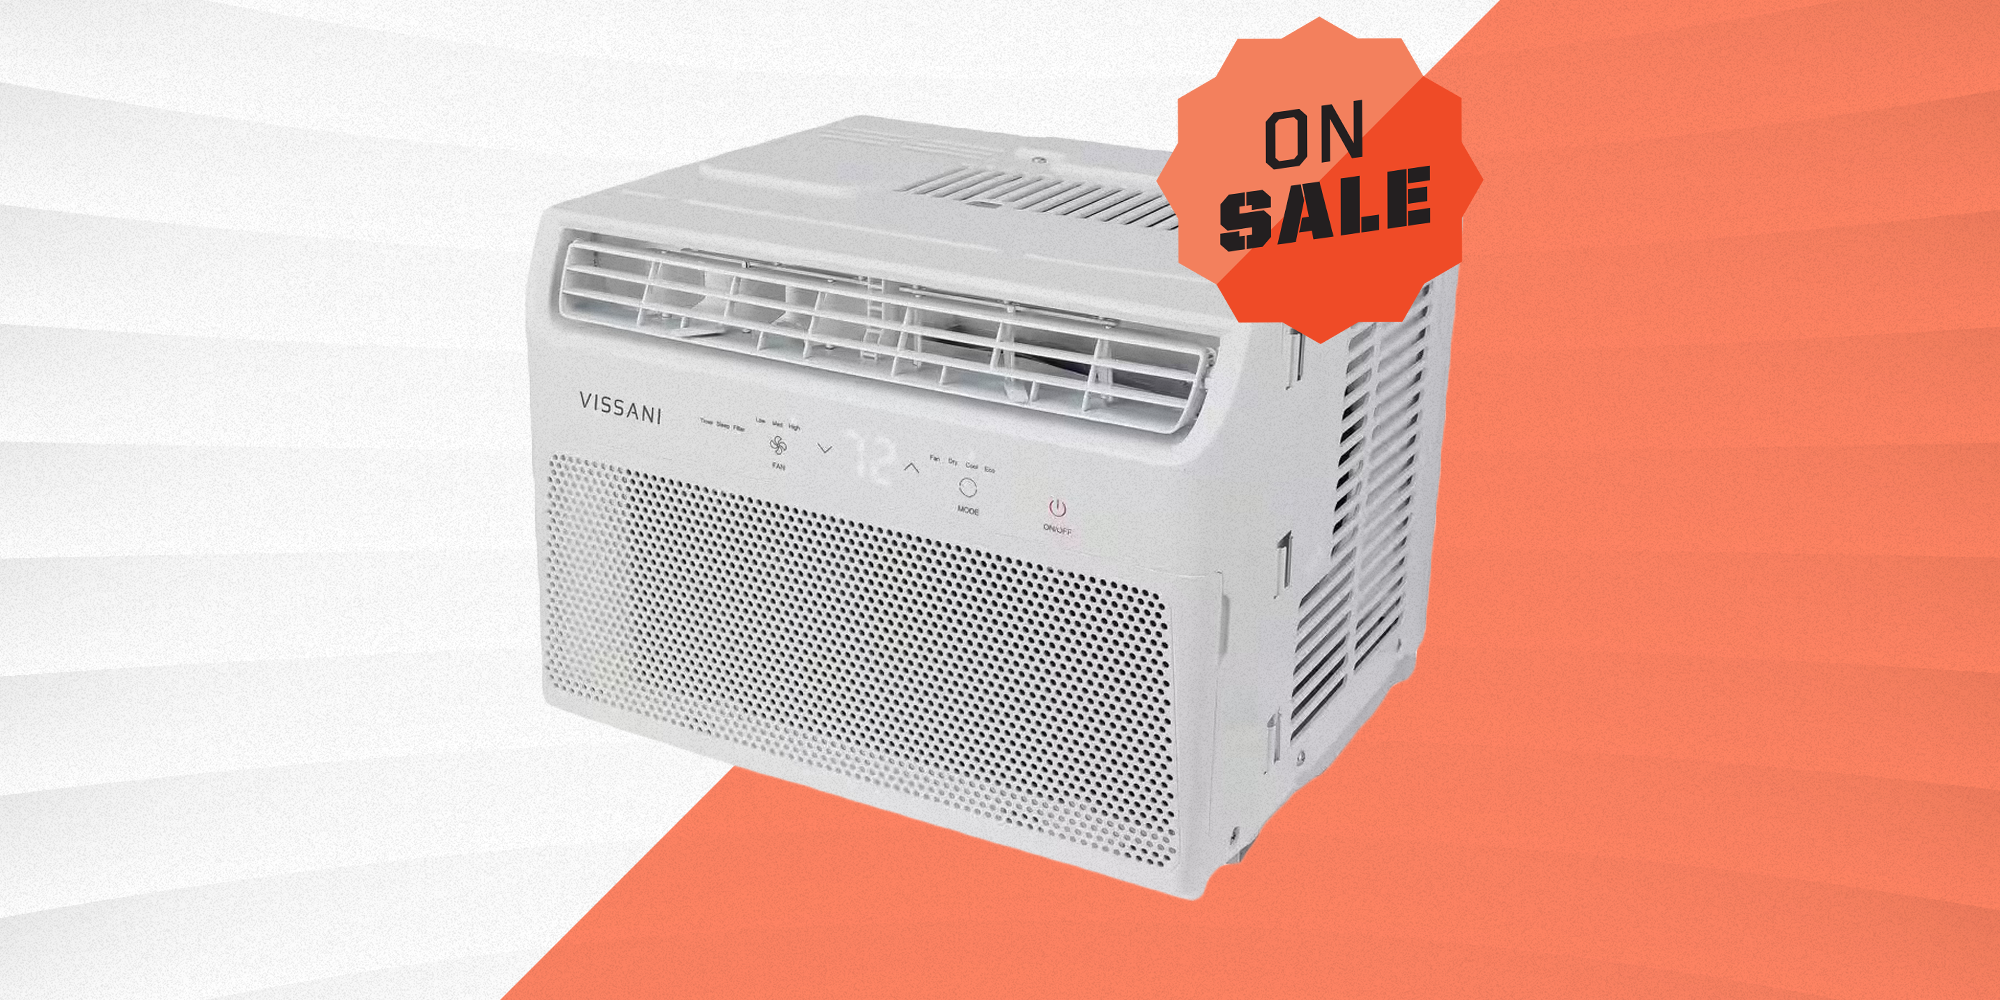 Best Black and Decker Portable Air Conditioner Deal: Get 40% Off